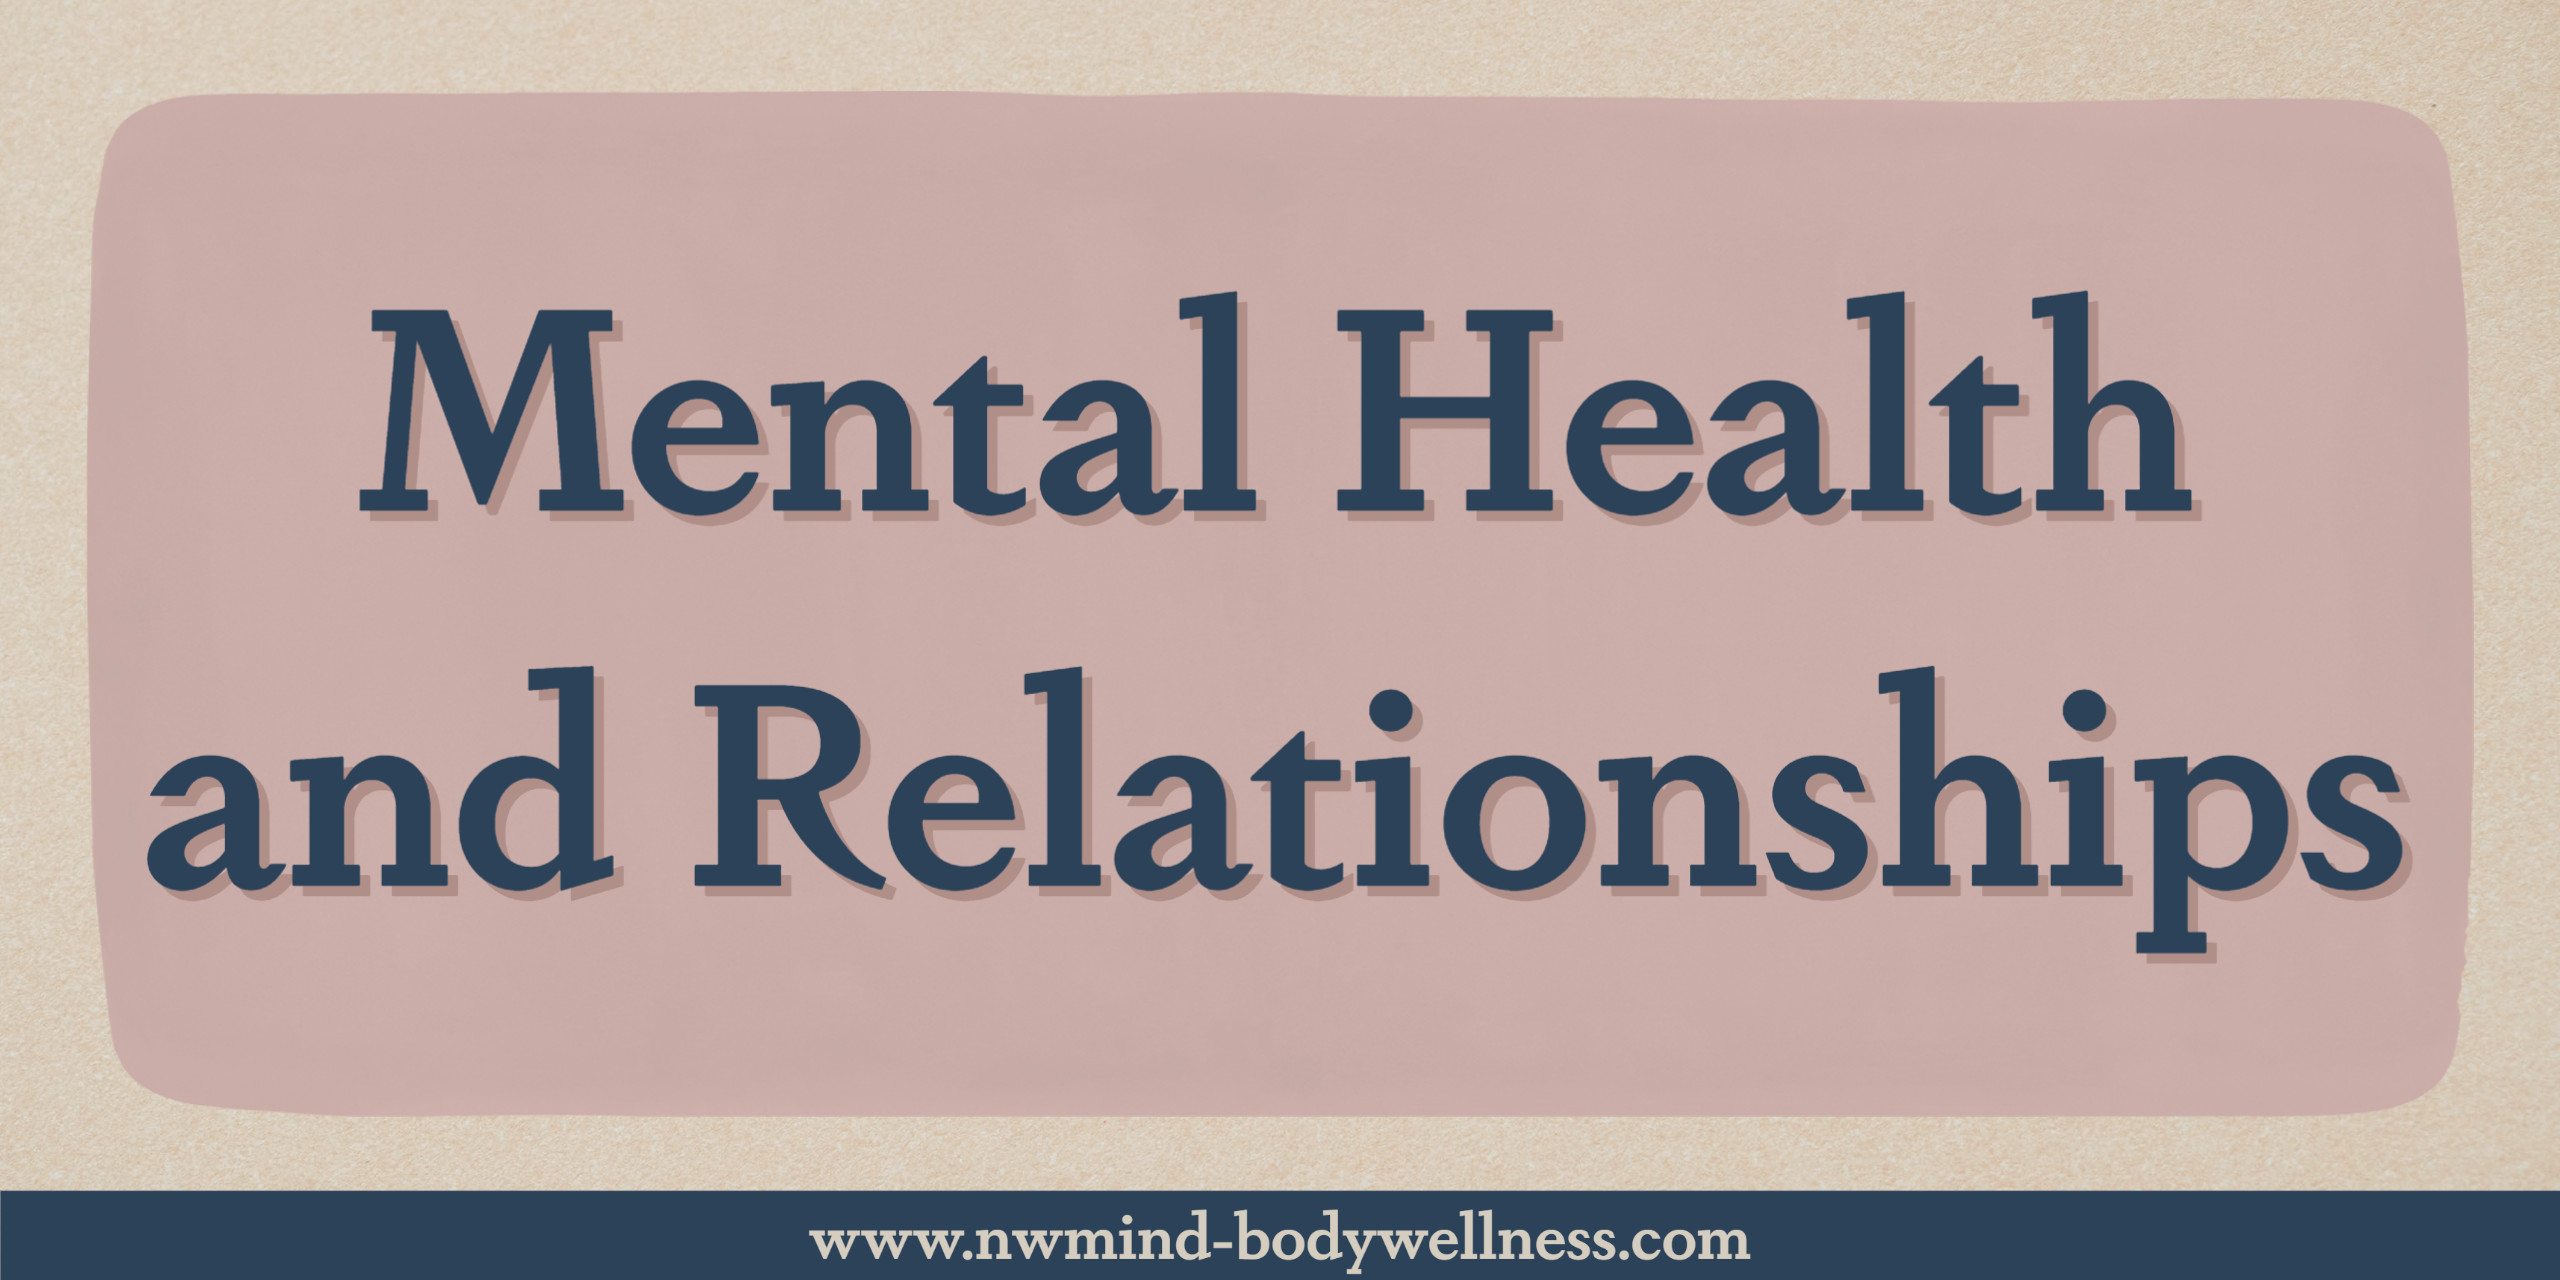 Mental Health and Relationships